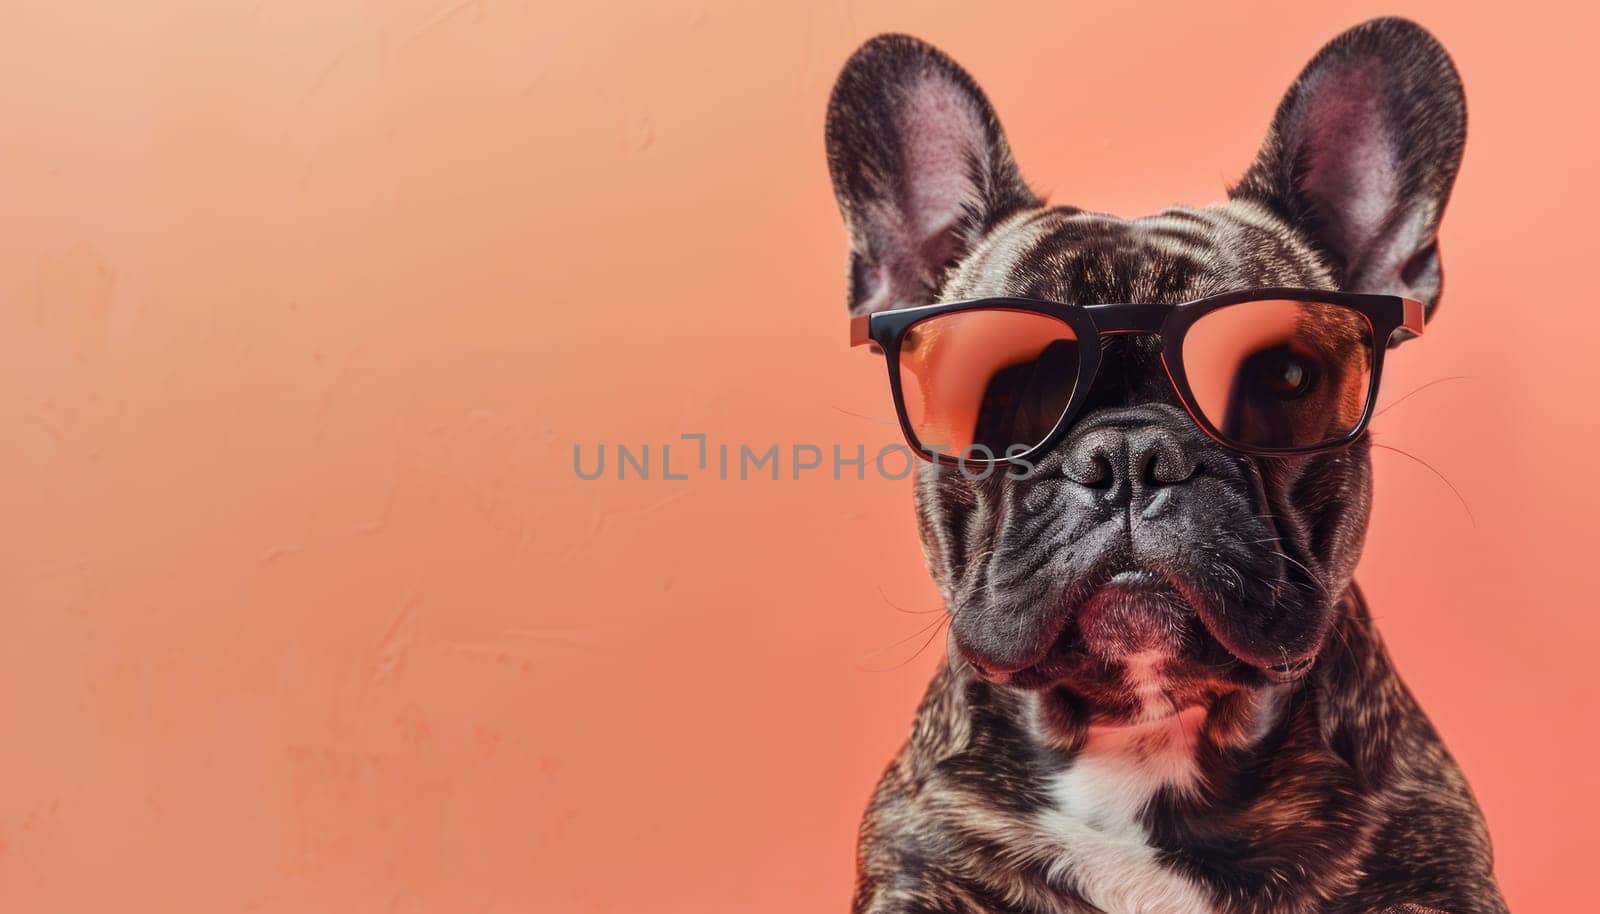 A dog wearing sunglasses and standing in front of an orange background by AI generated image.